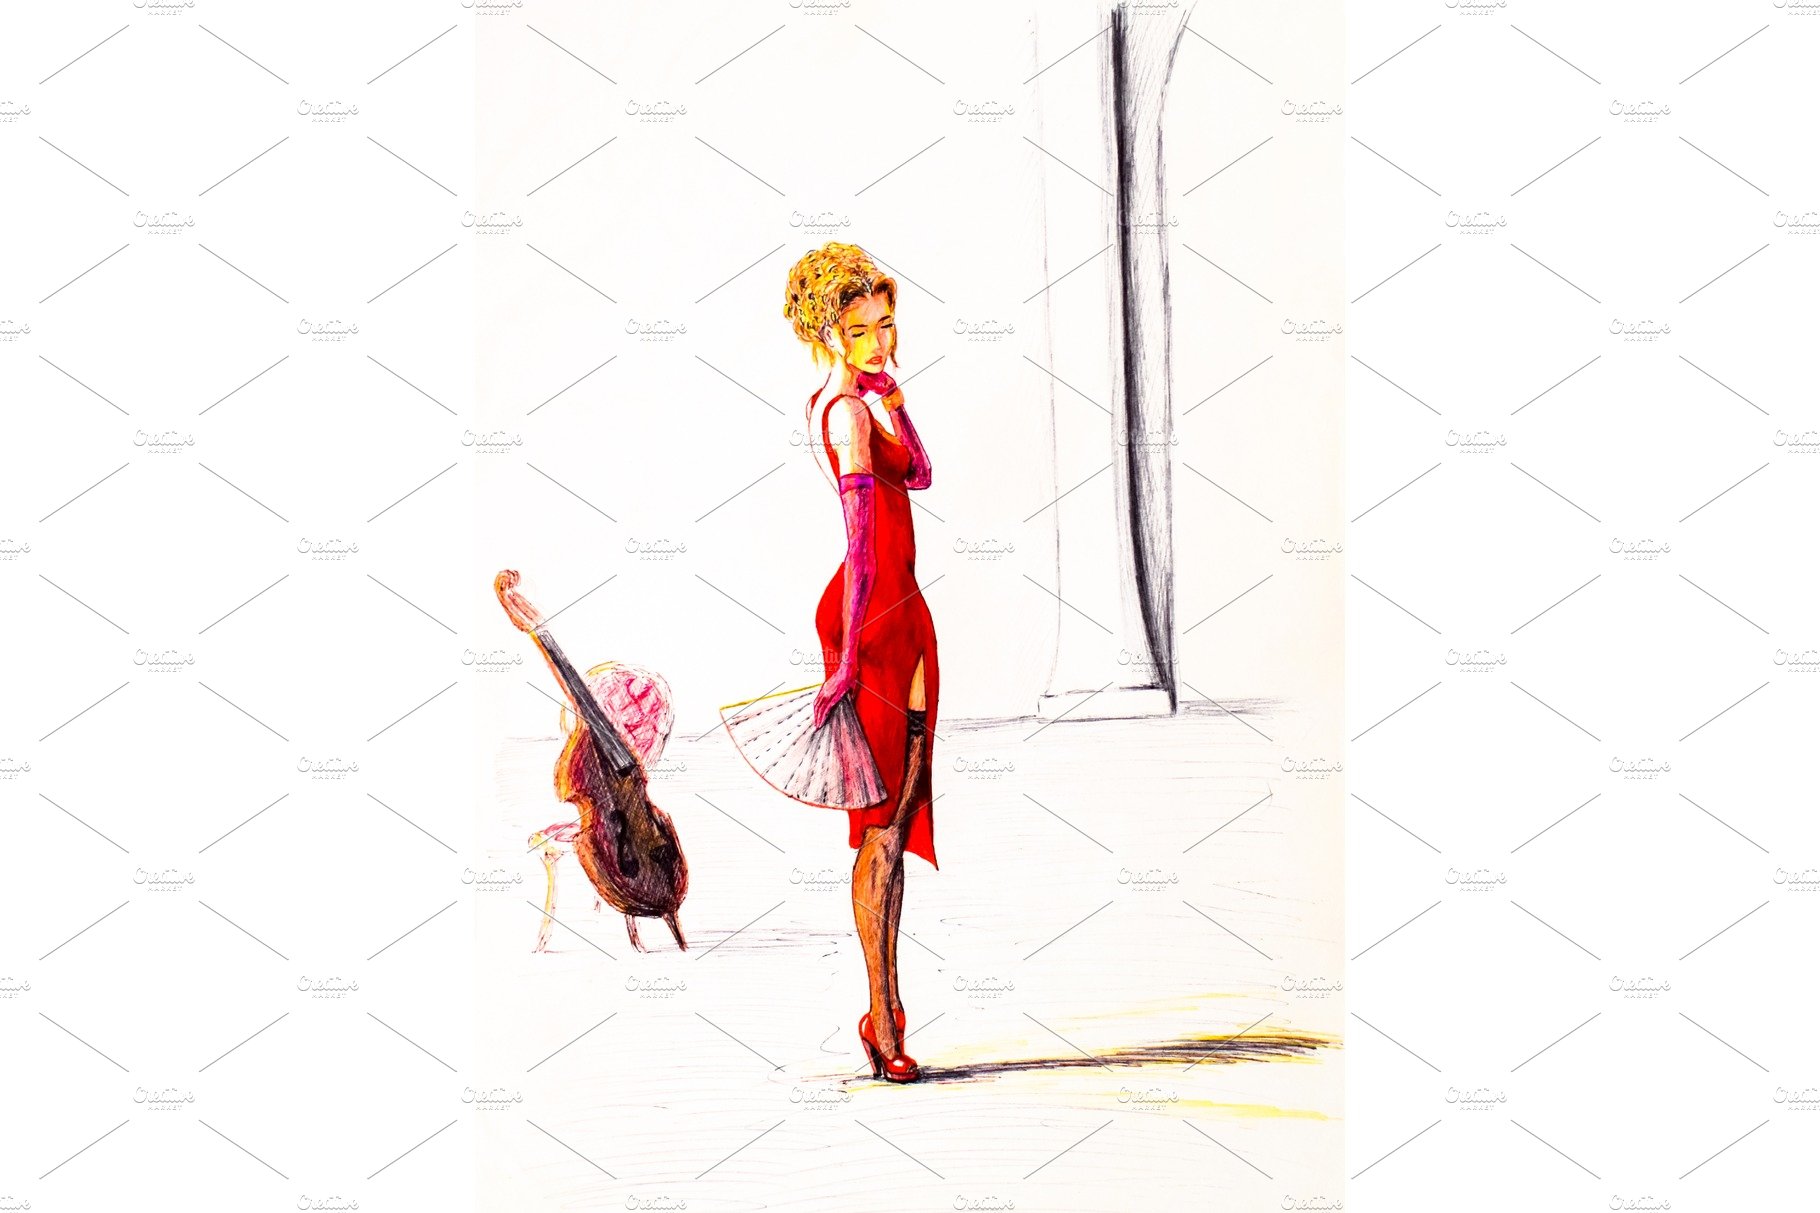 A girl violinist in a red dress and cover image.